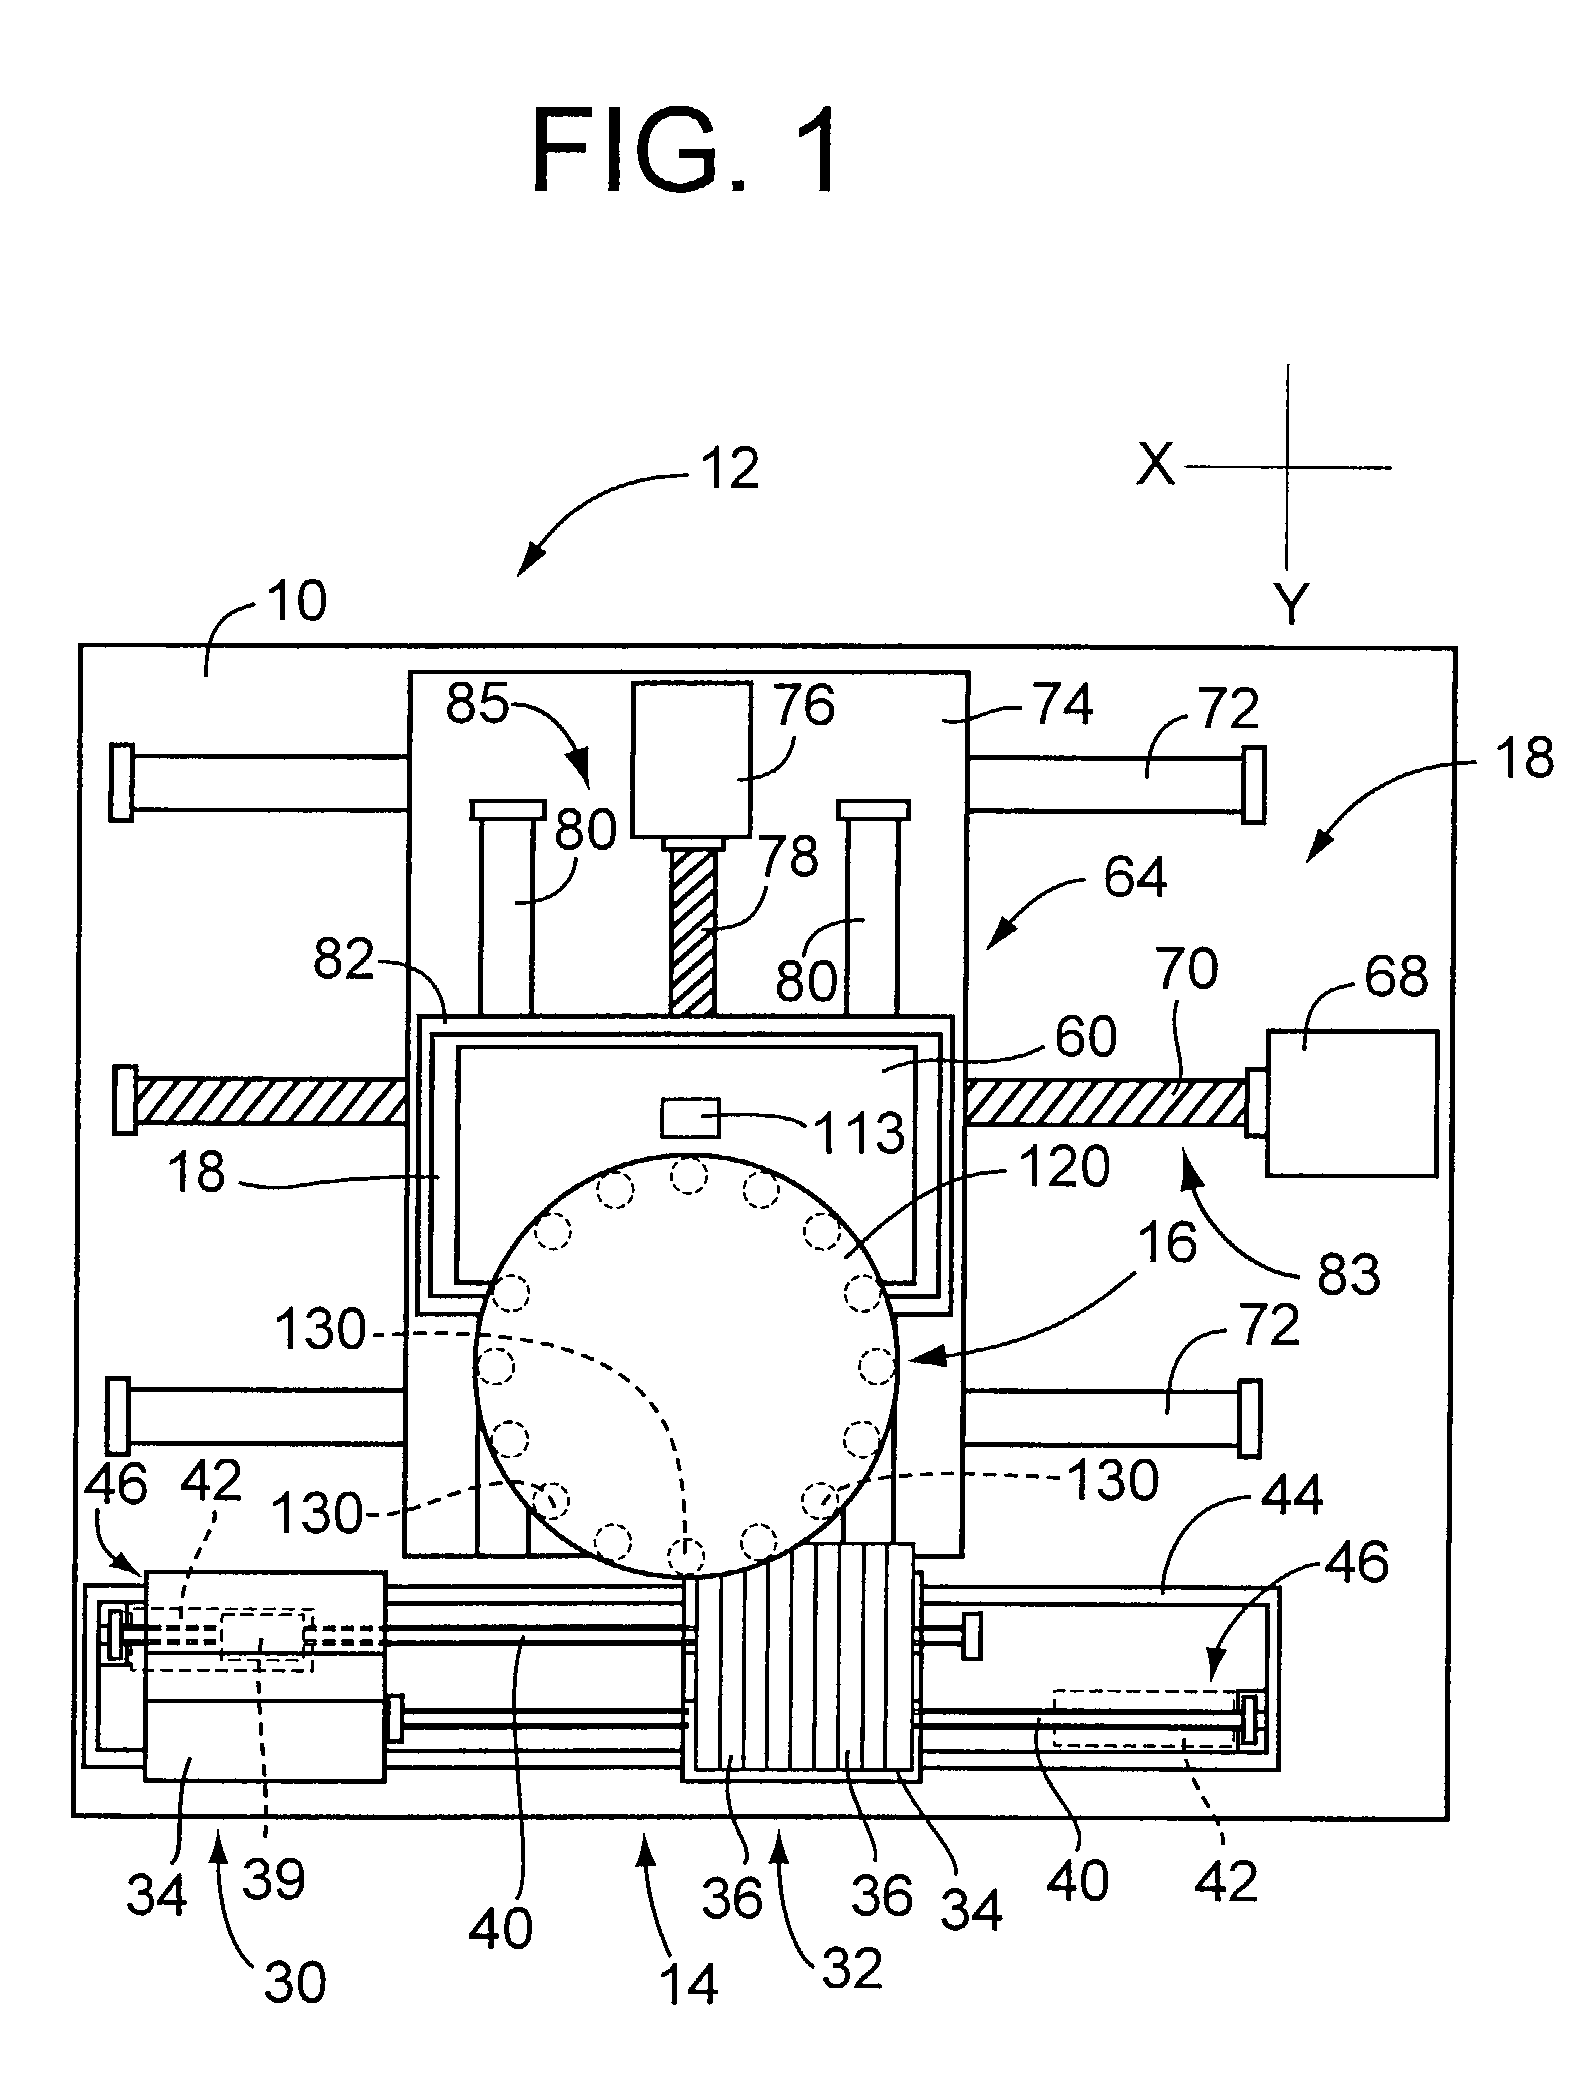 Electric-component mounting system